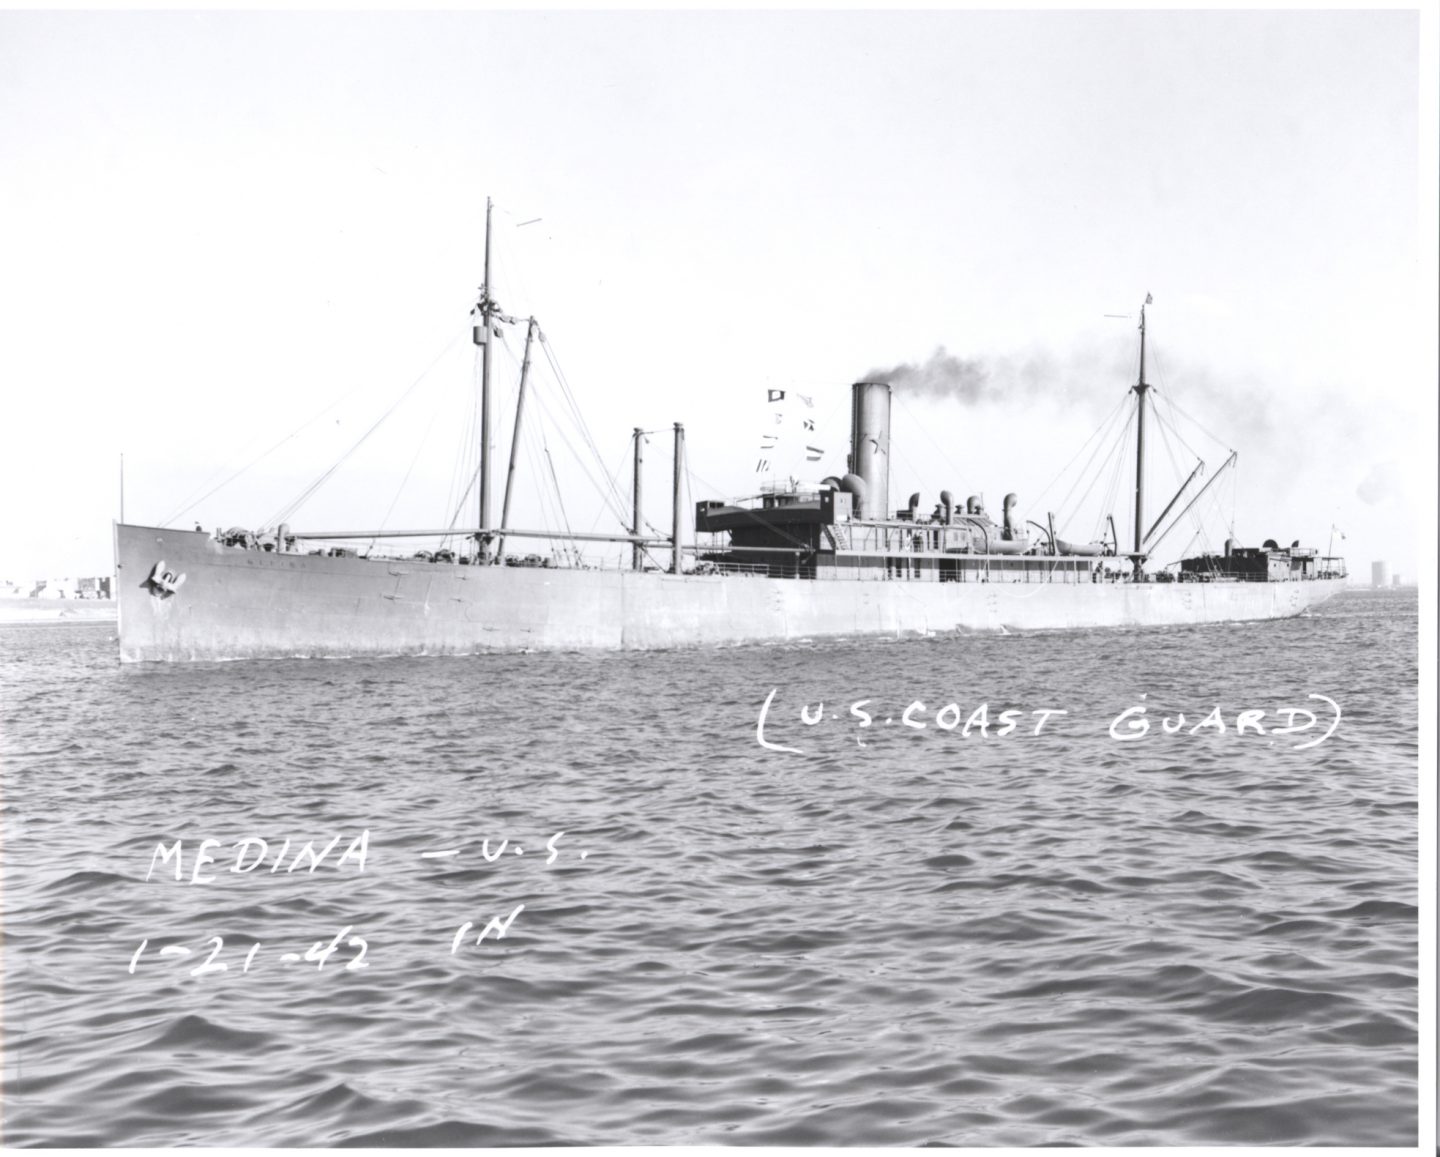 SS Medina Newport was built in 1914 by the News Shipbuilding and Dry Dock Company for the Mallory Steamship Company (USA). It was commissioned into service along the west coast of America during WWII by the US Coast Guard, and was responsible for freighting onions.